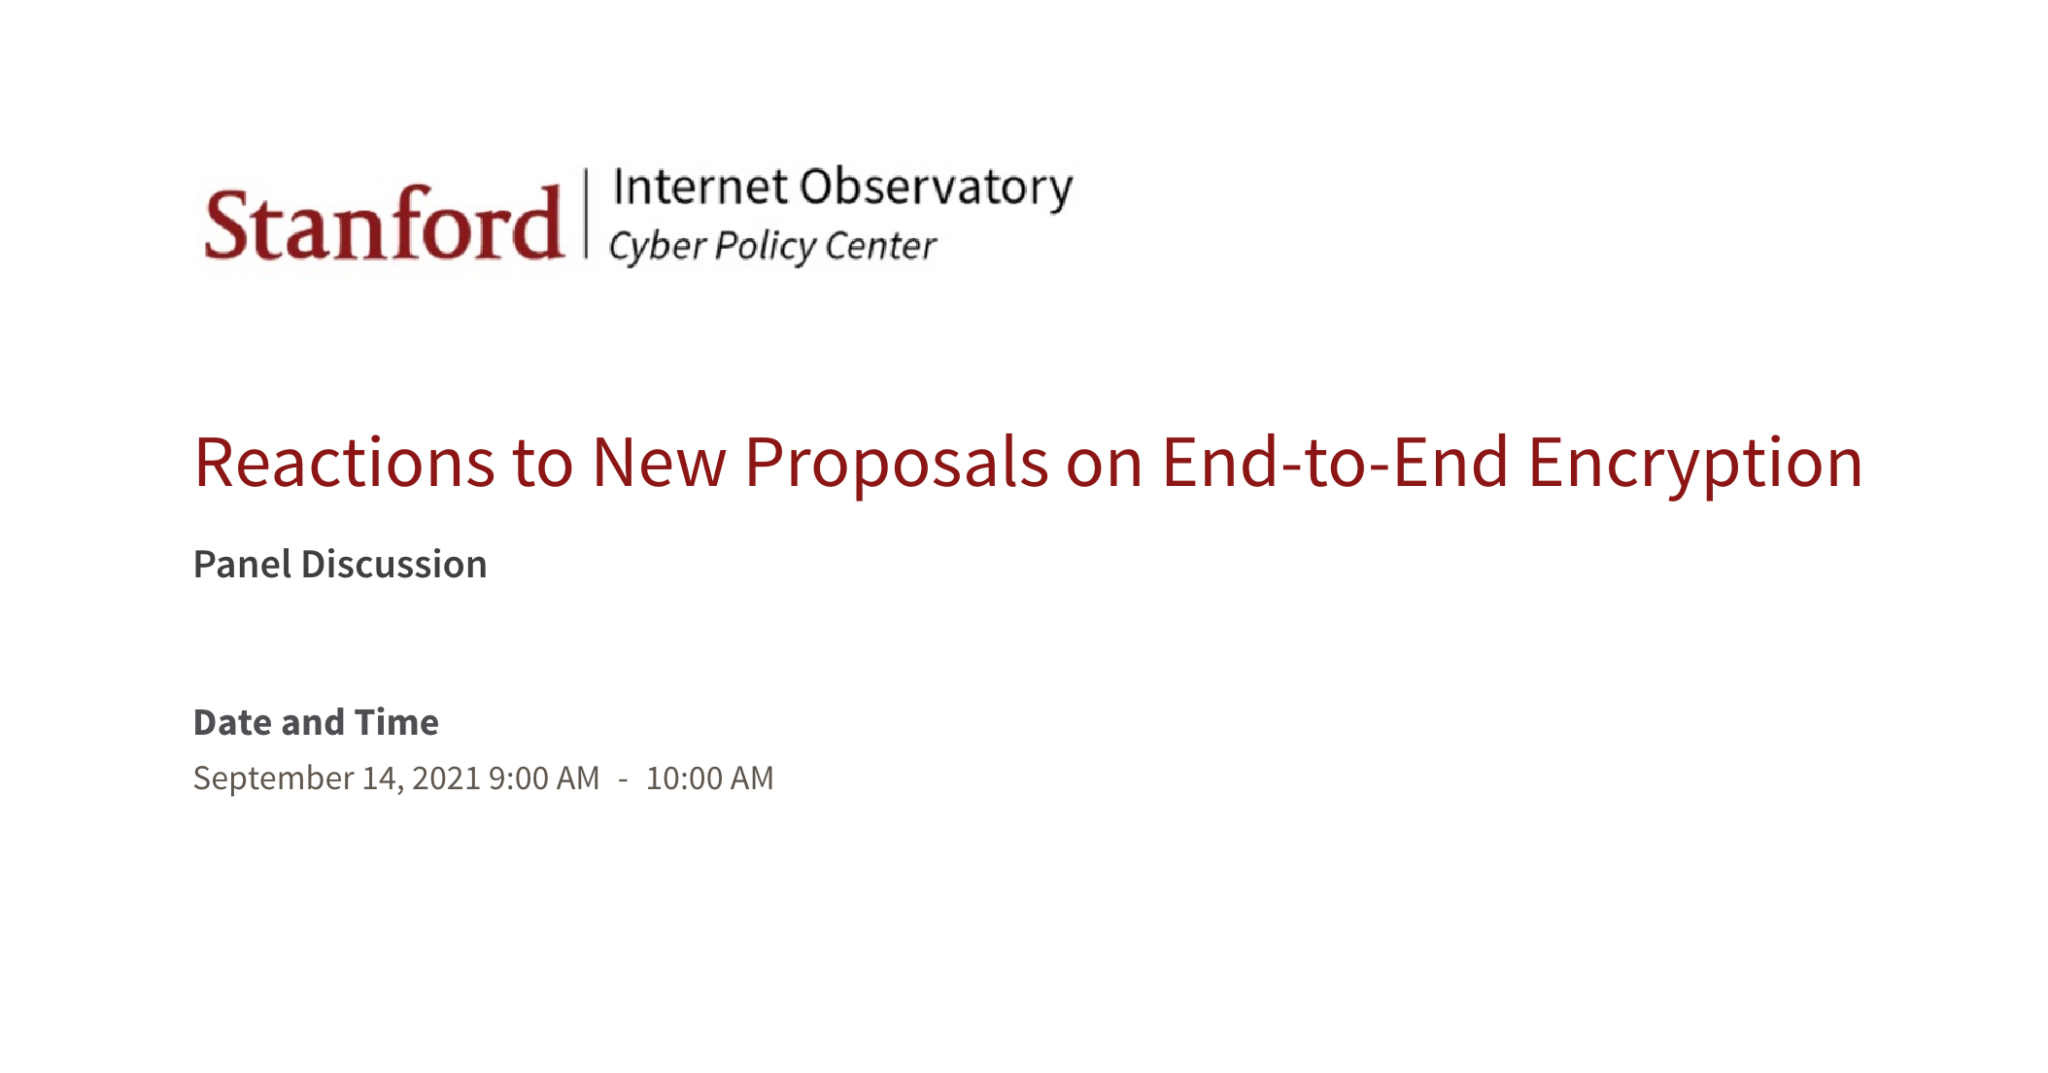 Stanford Internet Observatory Reactions To New Proposals On End To End